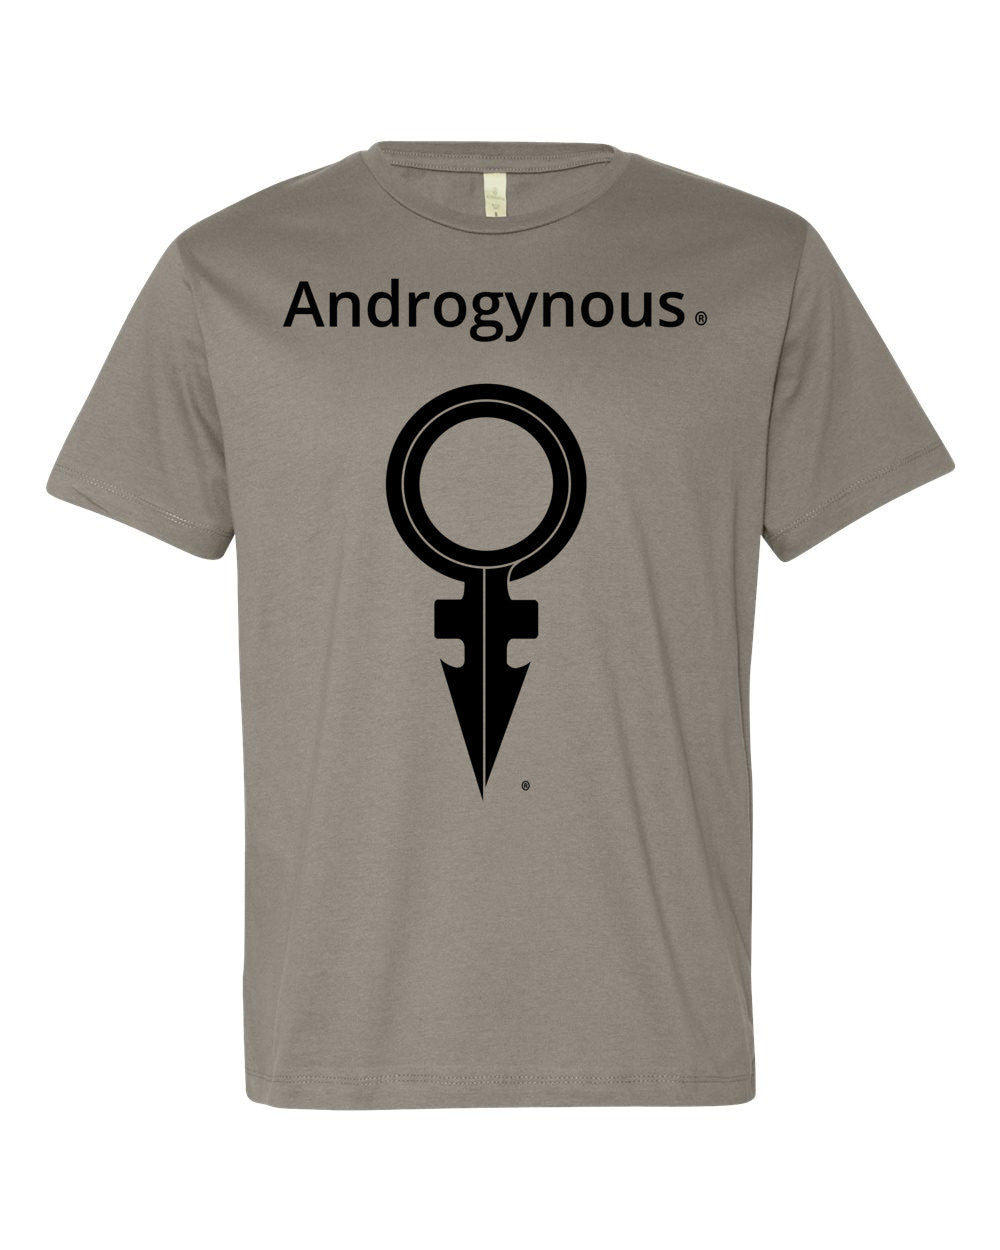 ANDROGYNOUS + SYMBOL BLACK ON GREY PRINTED FINE JERSEY COTTON-T-SHIRT